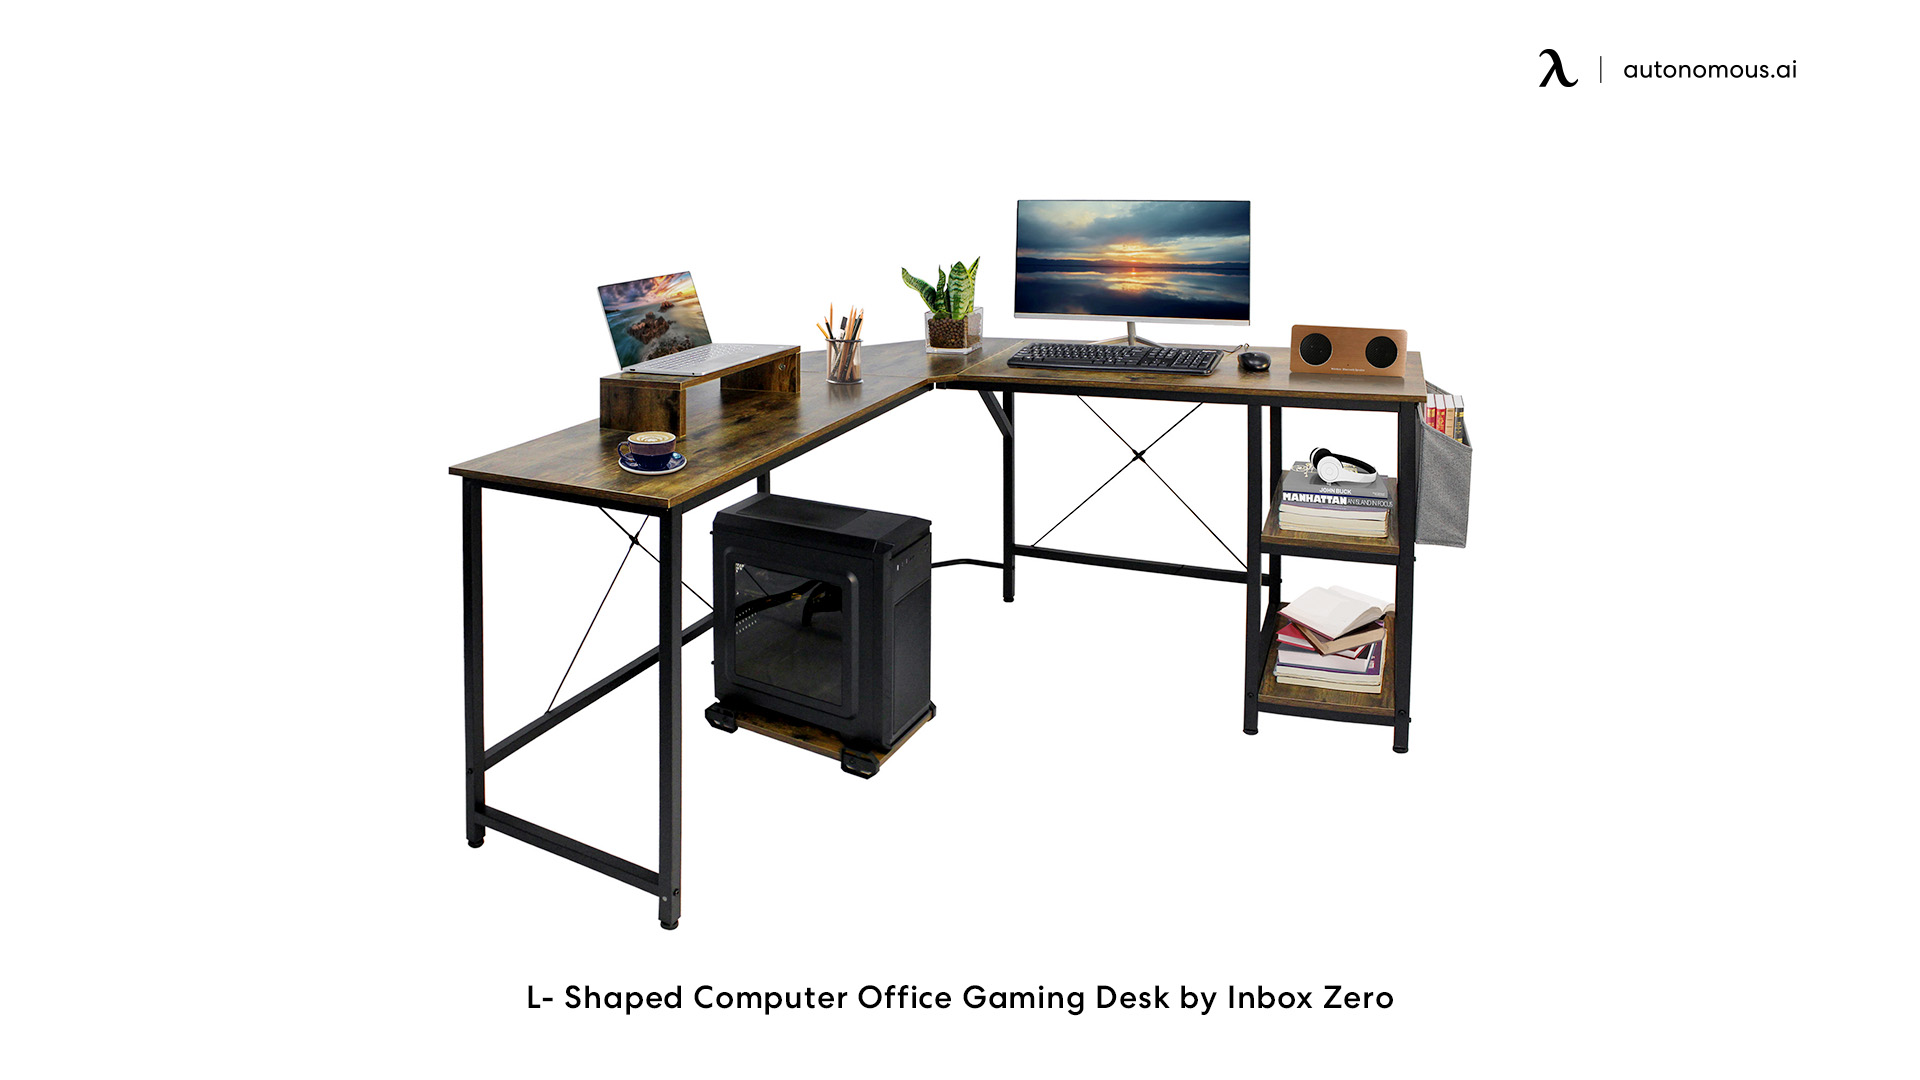 L- Shaped Computer Office Gaming Desk by Inbox Zero